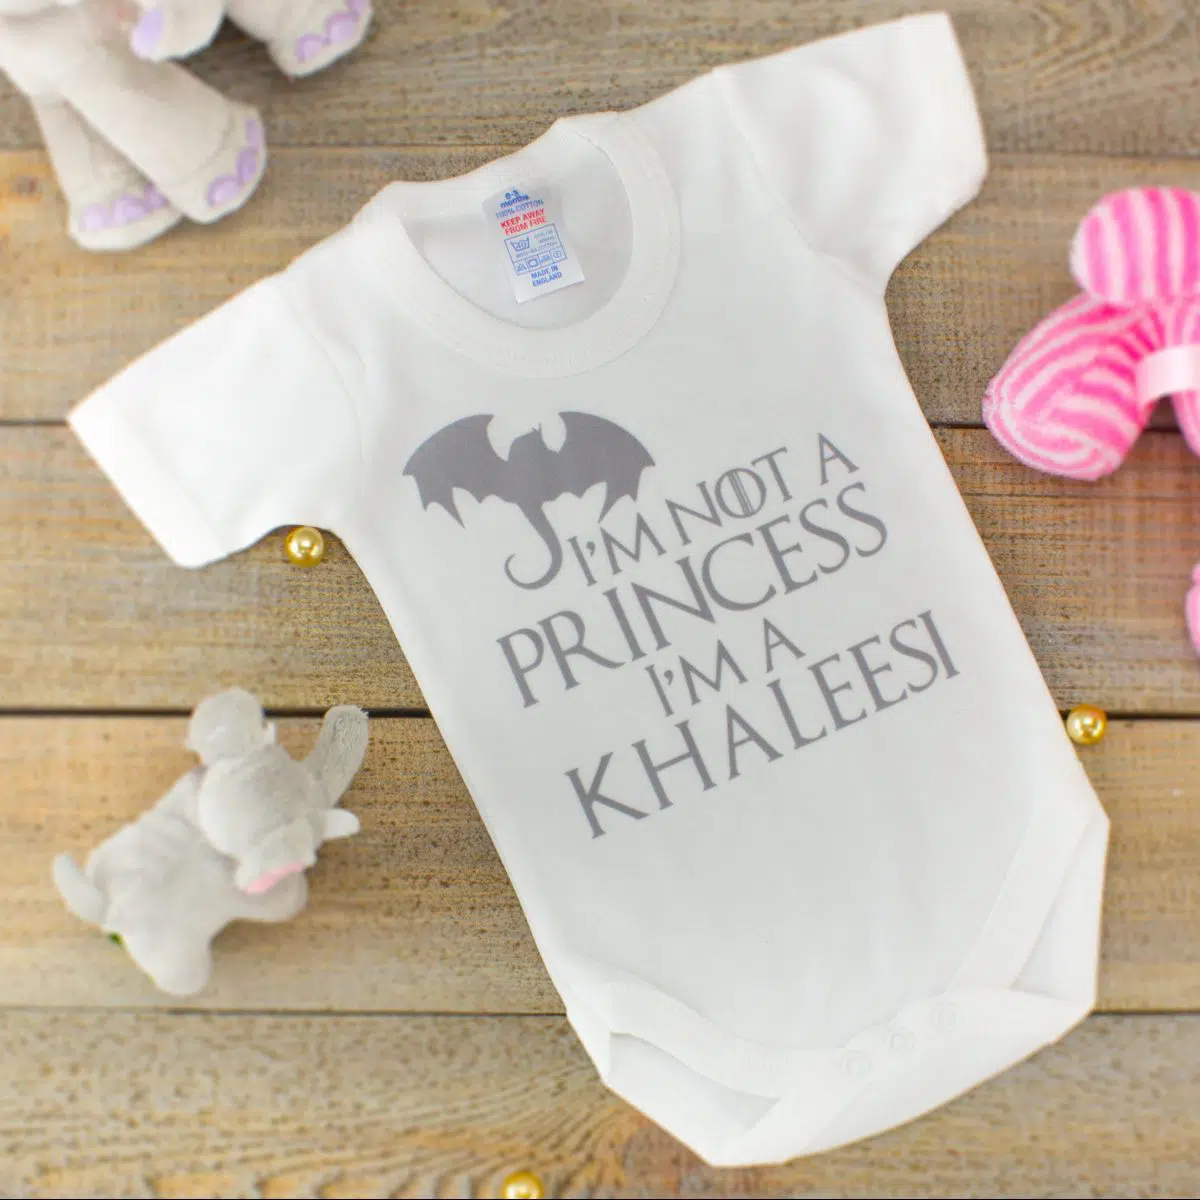 game of thrones baby clothes - i'm a khalessi